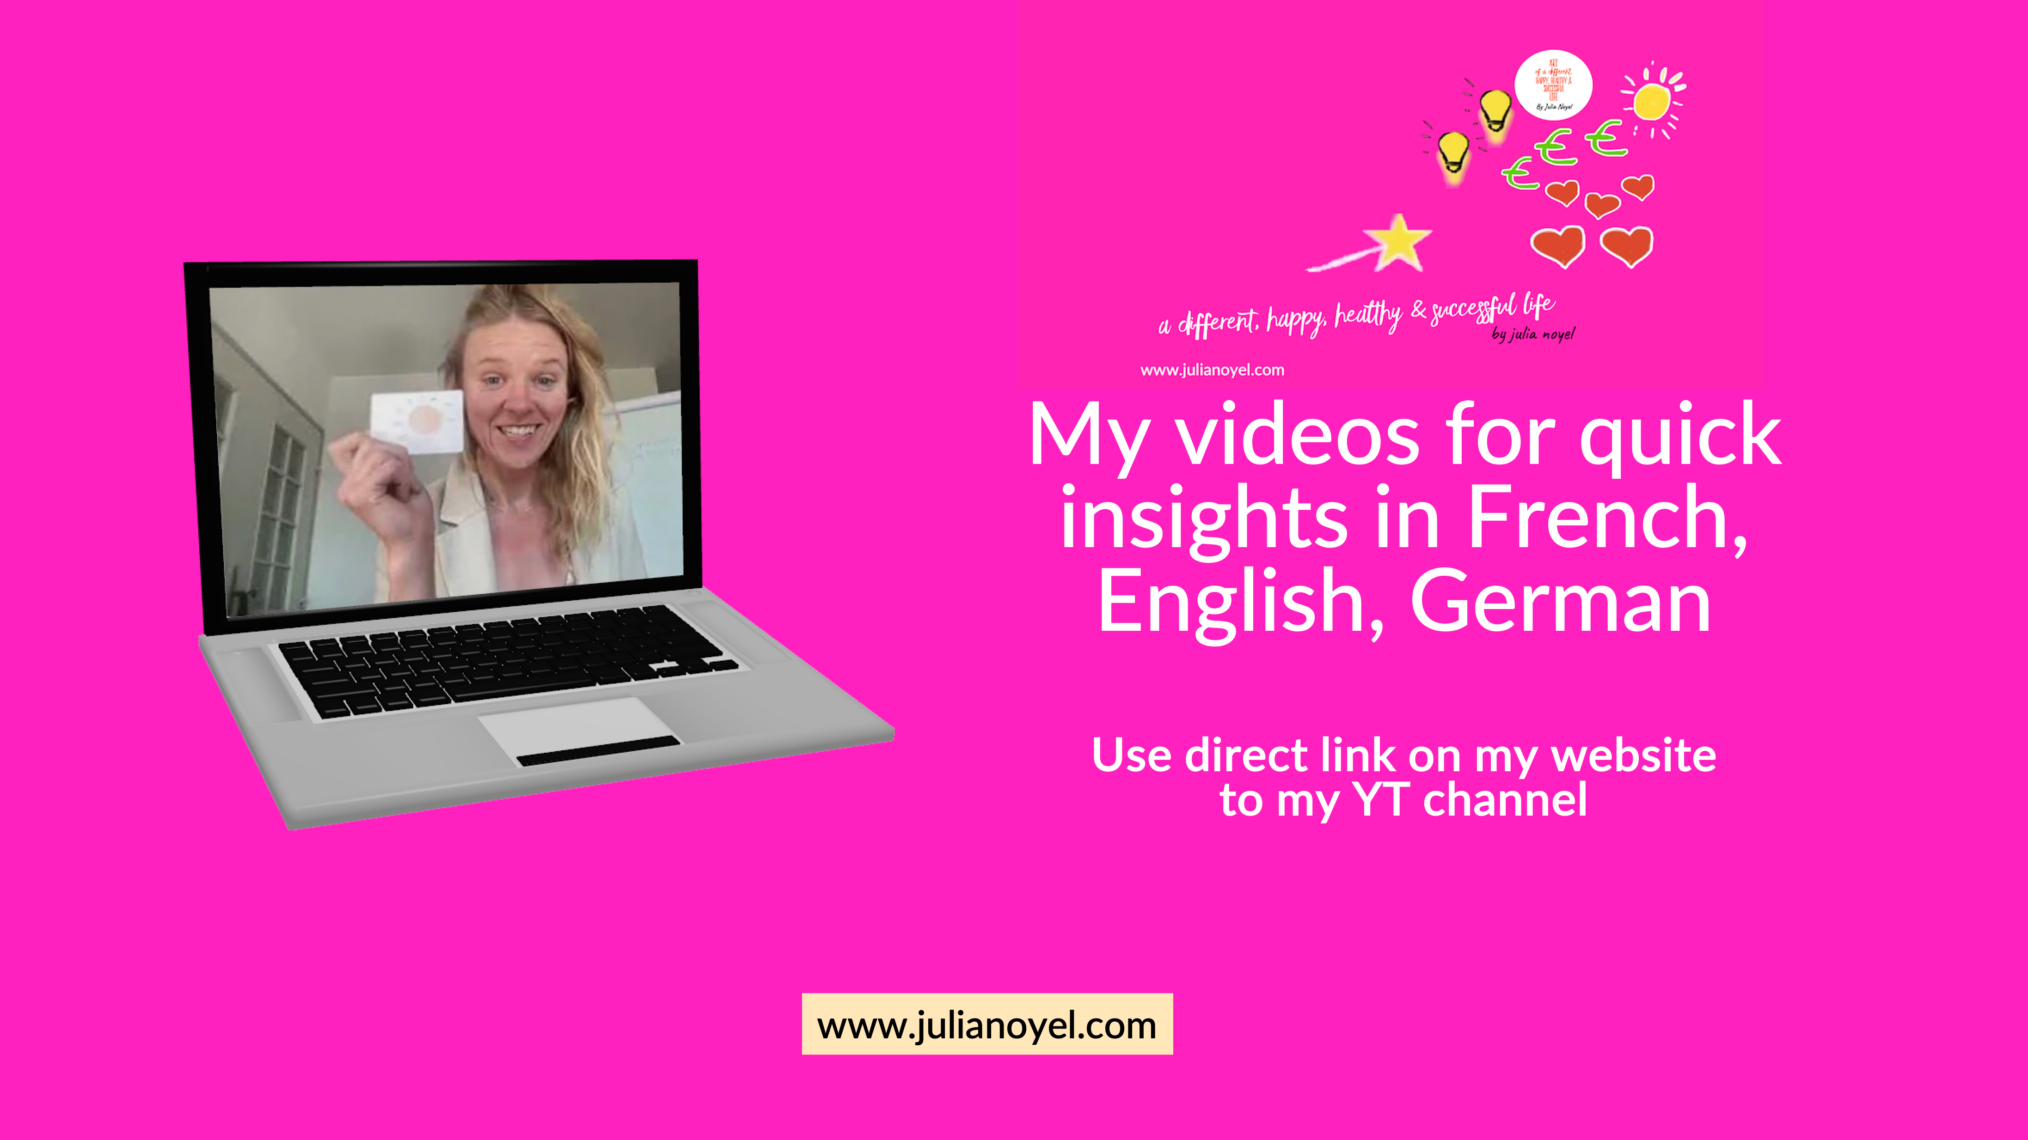 INFP intuitive insights guidance réussir couple enfants travail financesmy videos for quick guidance